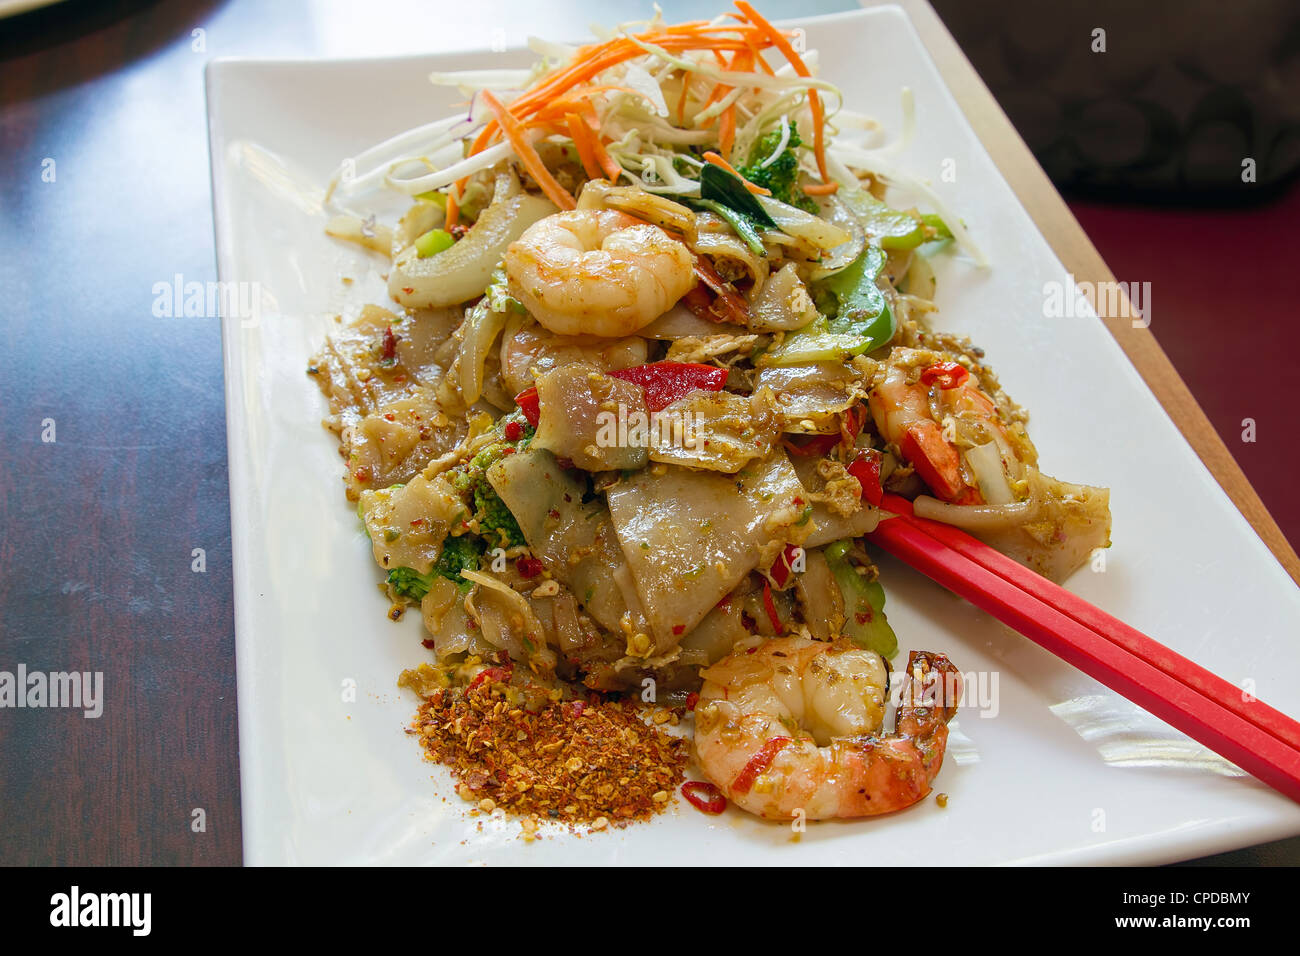 Thai Pad See Ewe Stir Fried Noodles with Sweet Soy Sauce Prawns Vegetables and Spices Stock Photo